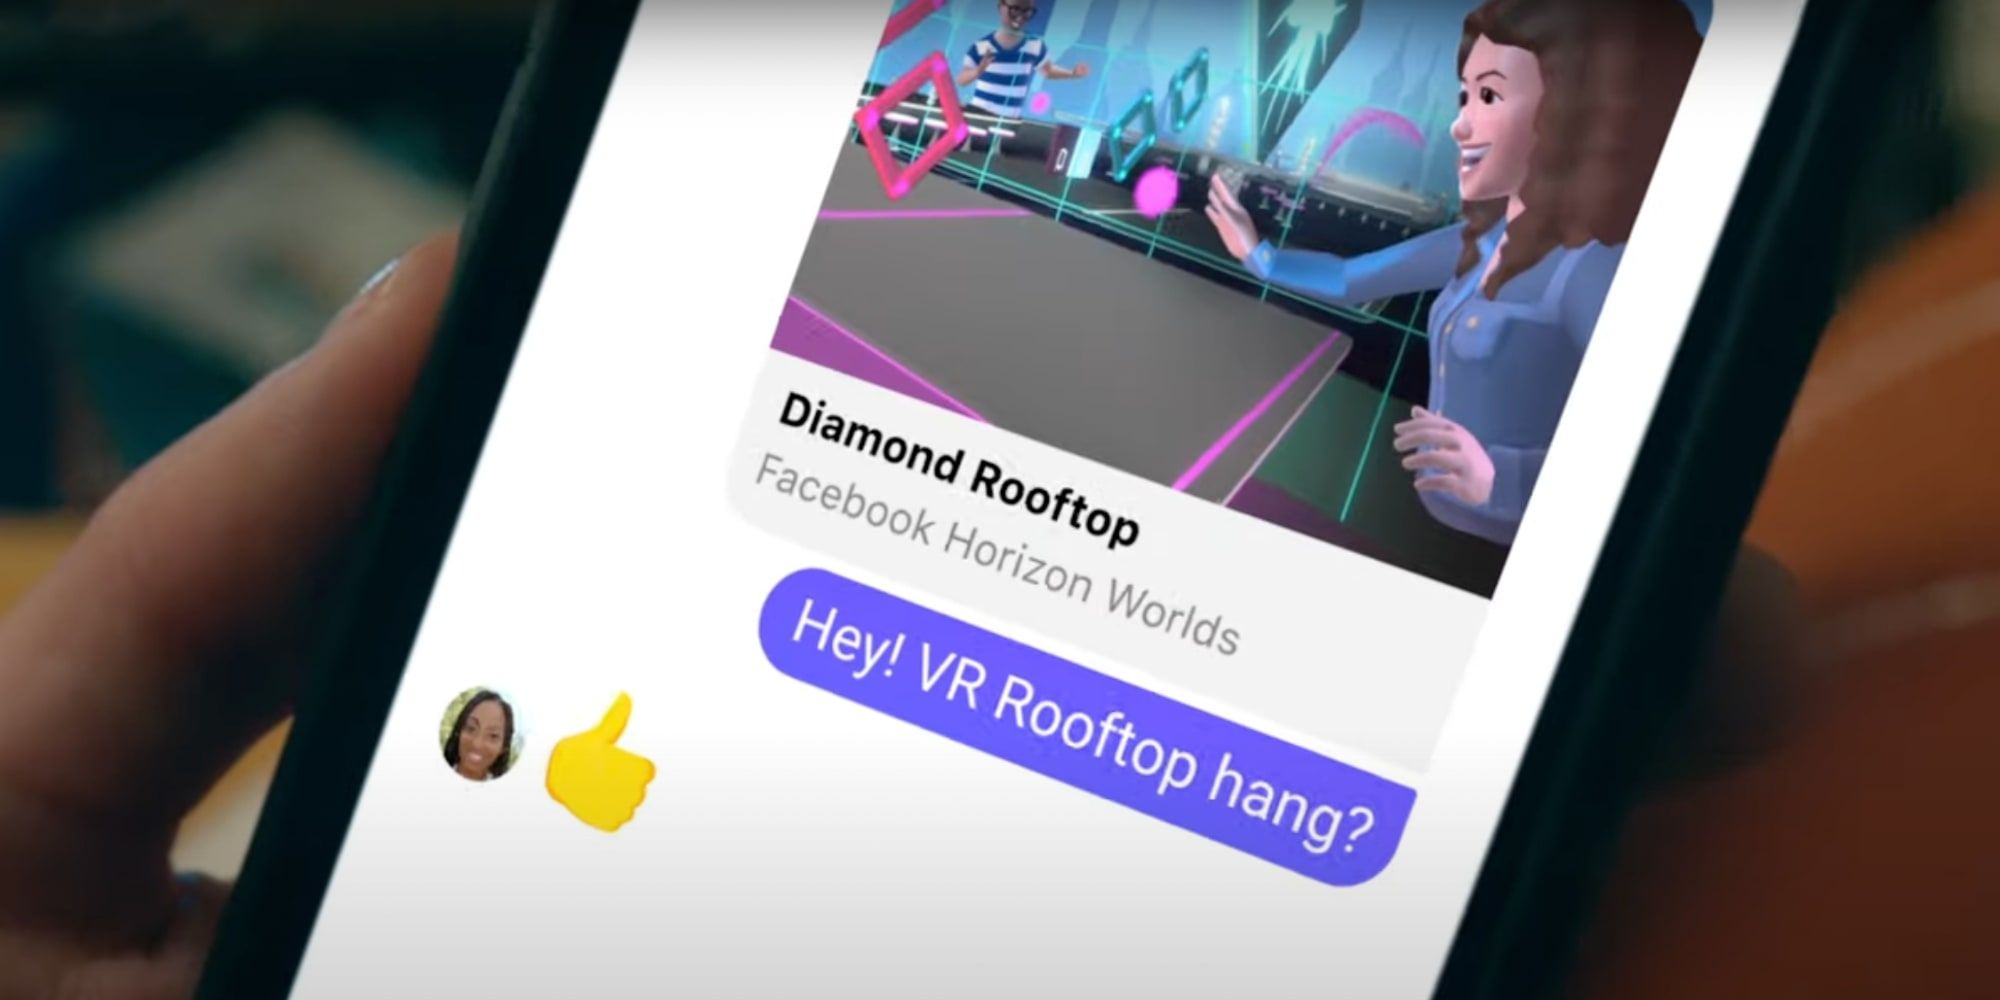 How To Use Or Disable Facebook Messenger In VR With Meta Quest